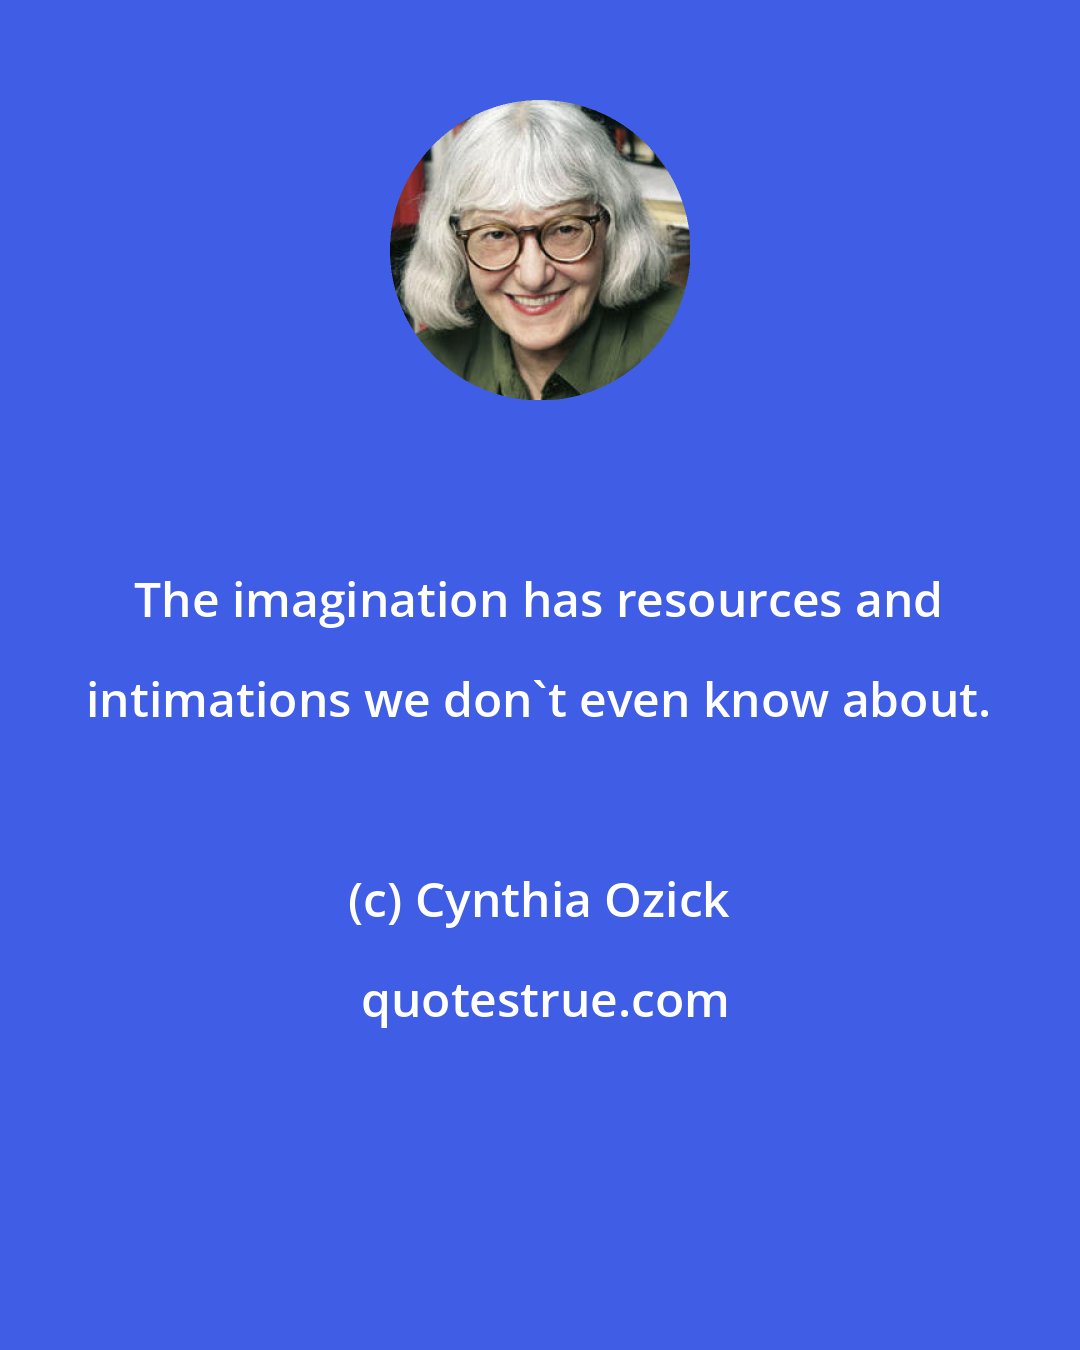 Cynthia Ozick: The imagination has resources and intimations we don't even know about.